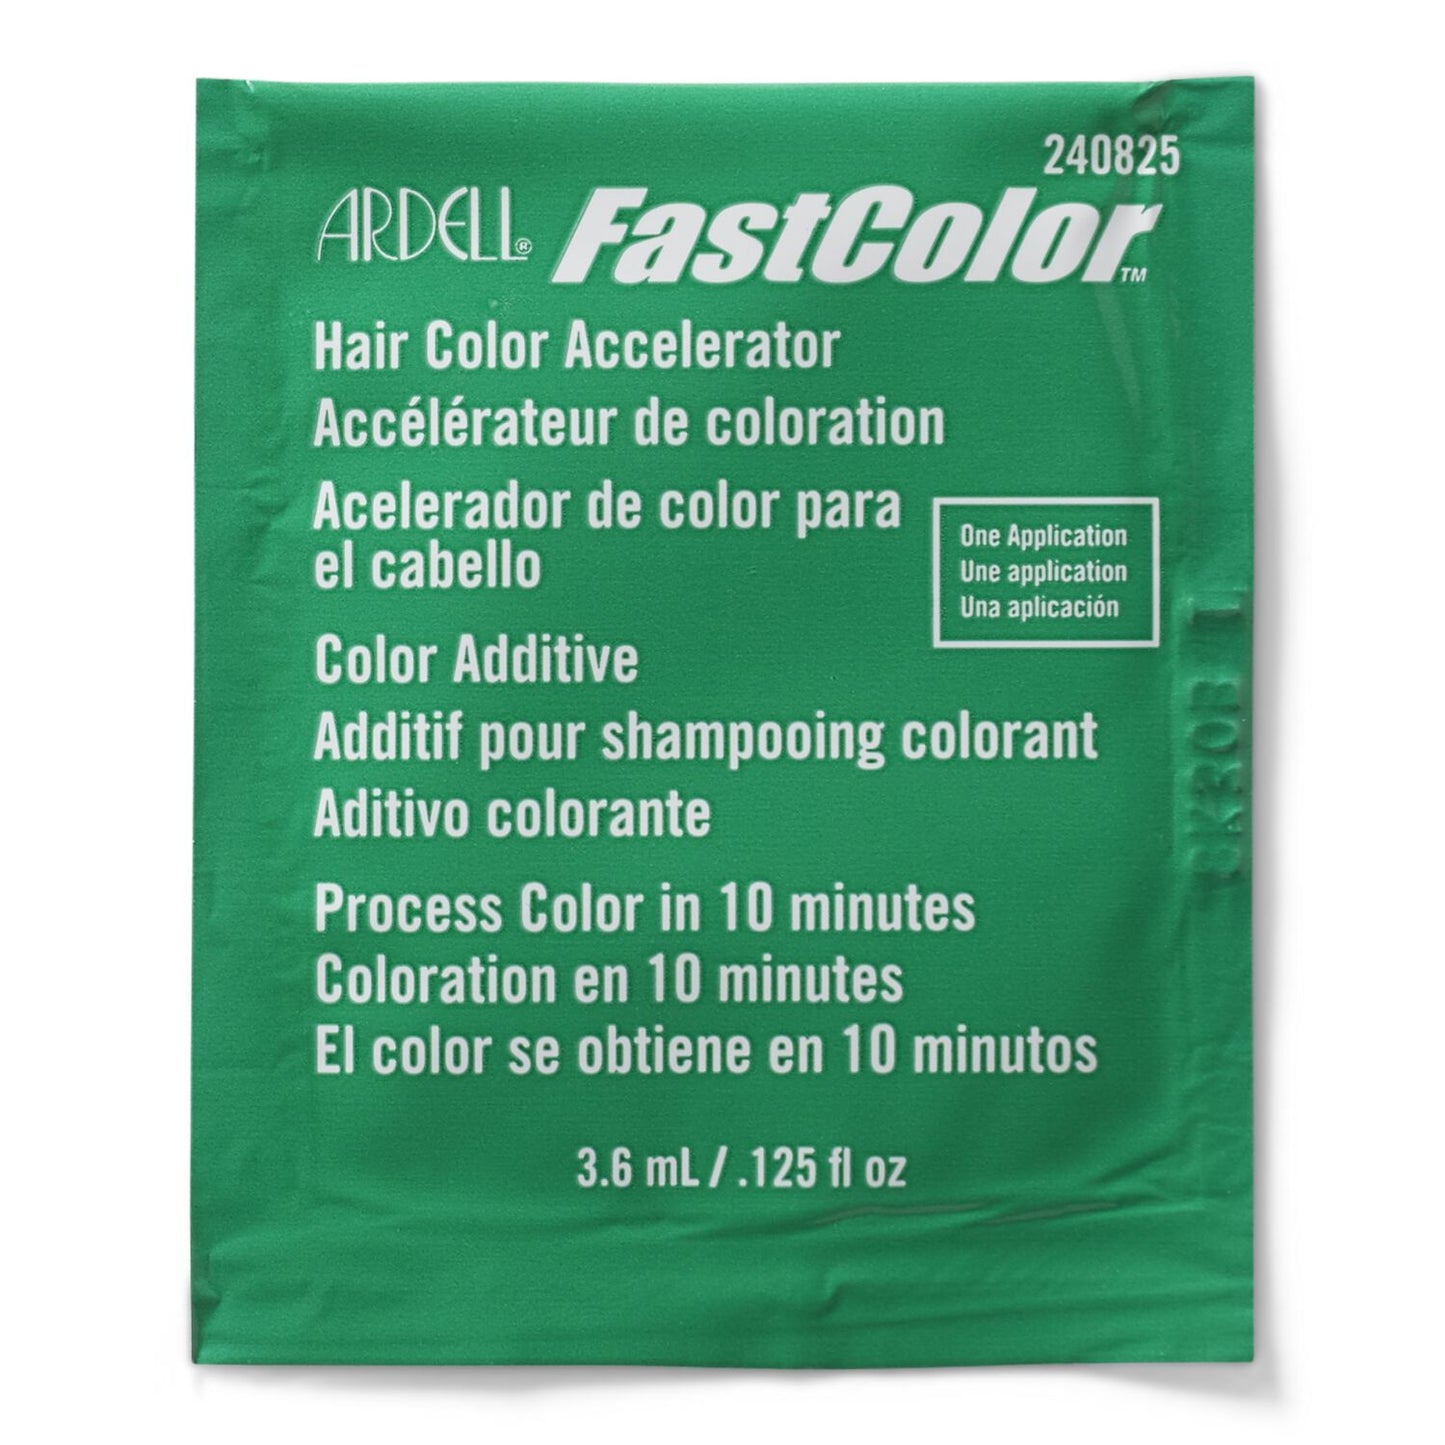 Ardell FastColor Hair Color Accelerator